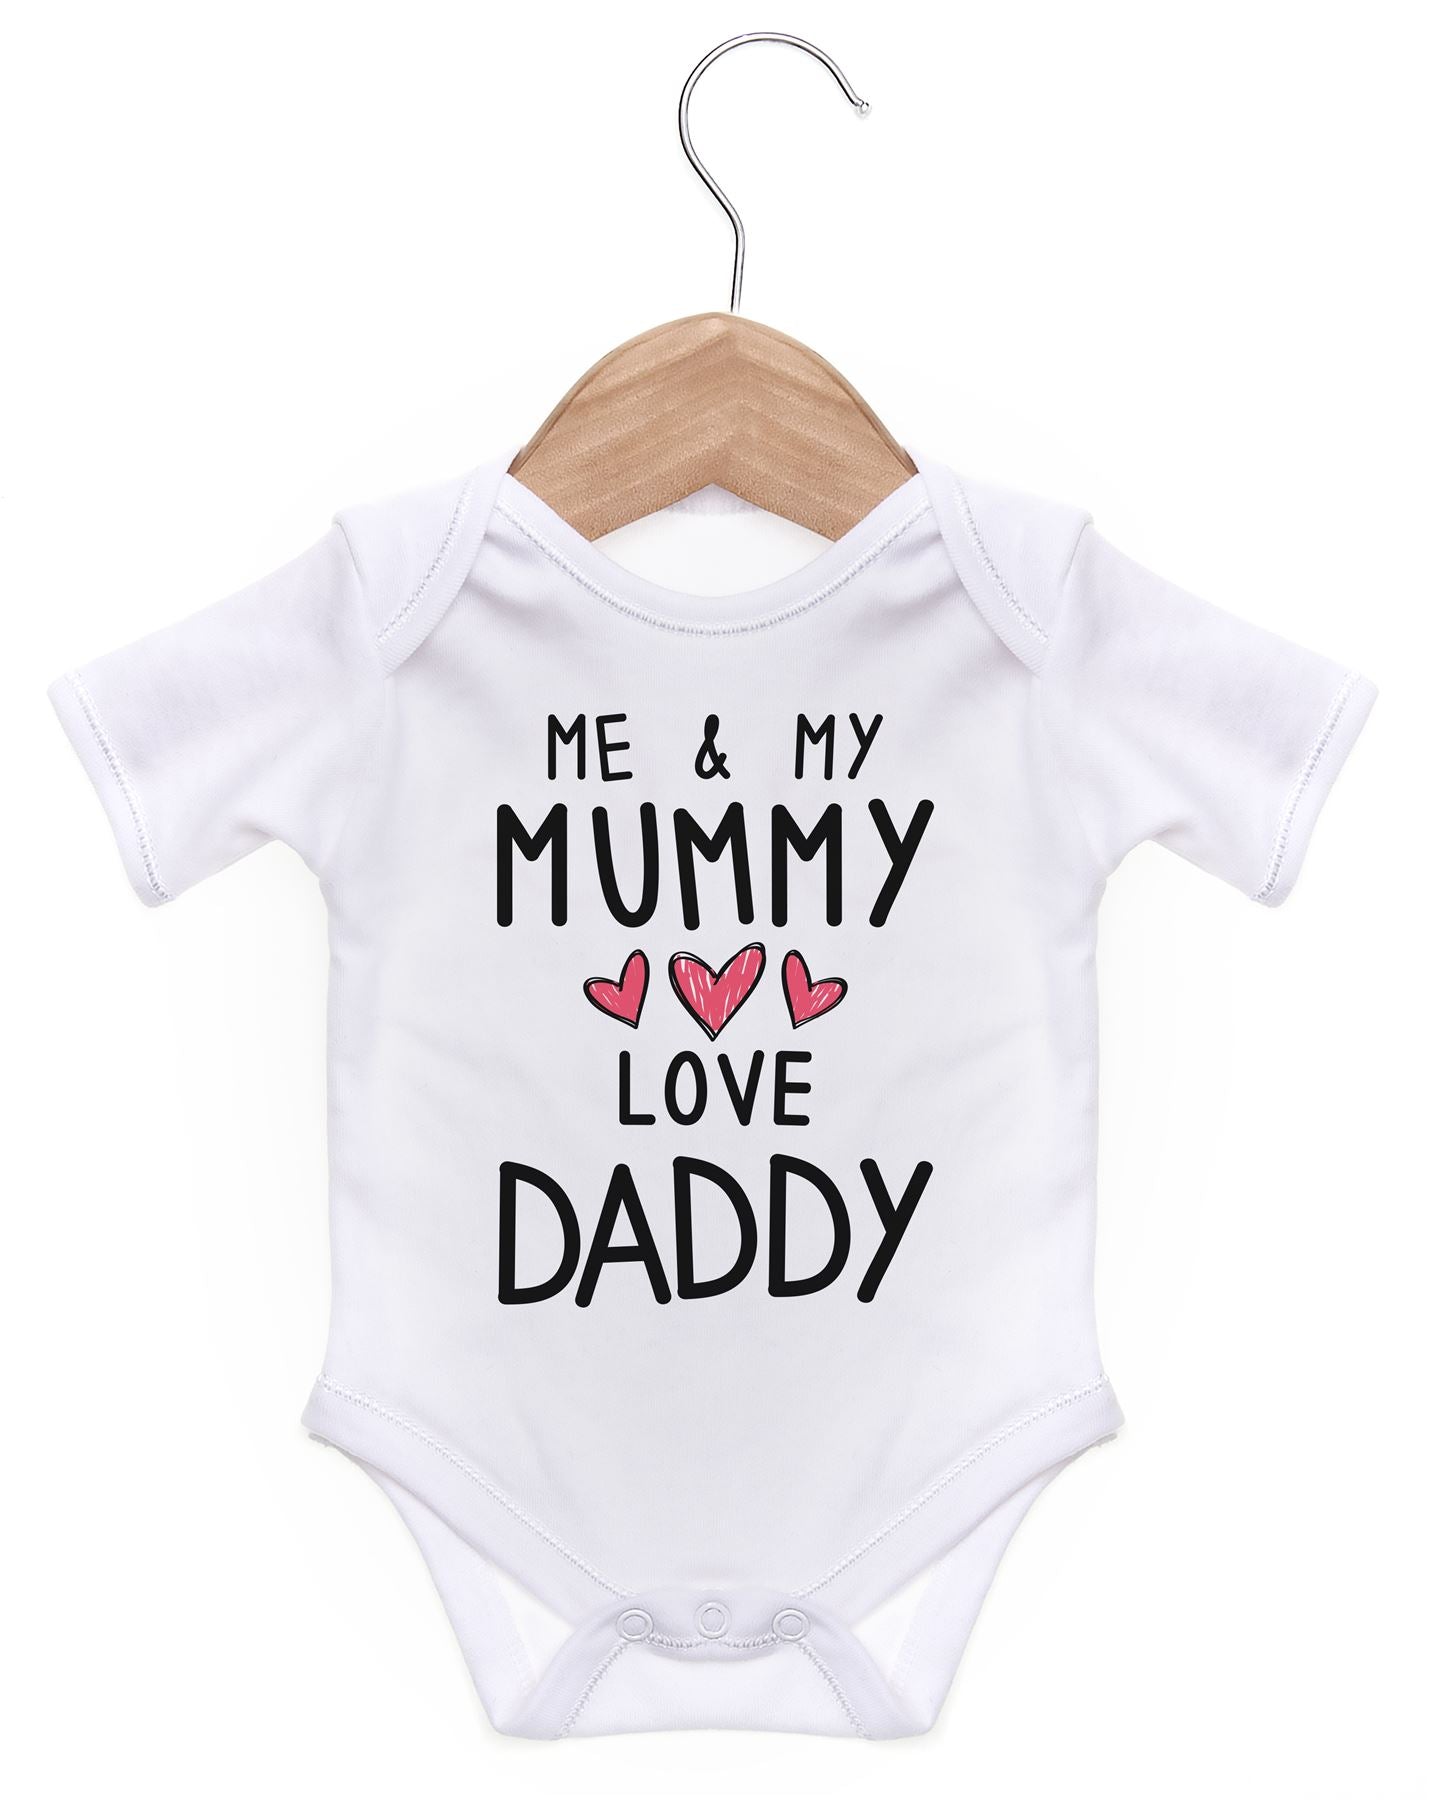 I Love Daddy Baby Clothes Off 57 Www Usushimd Com